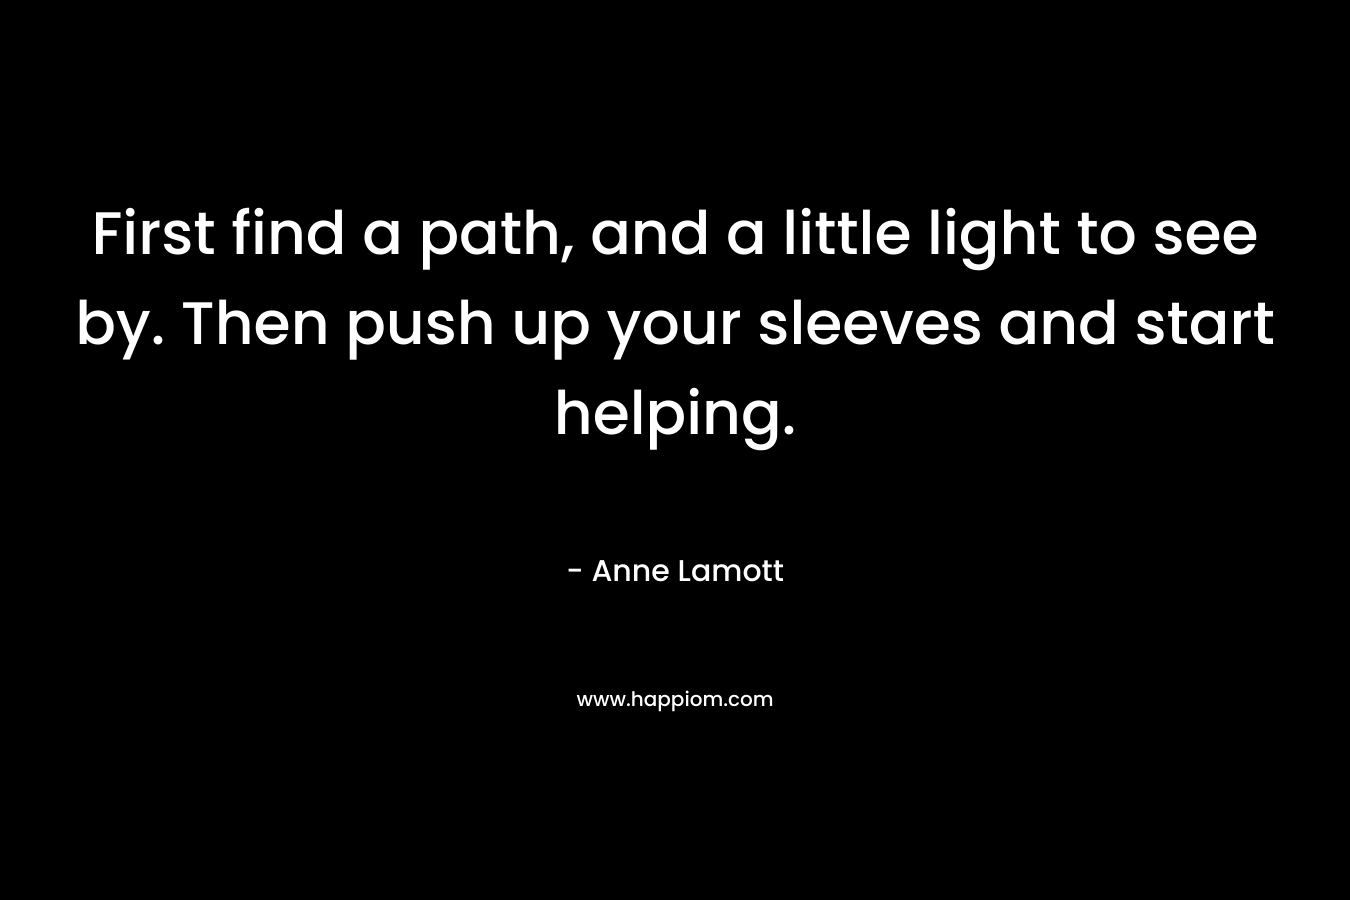 First find a path, and a little light to see by. Then push up your sleeves and start helping.